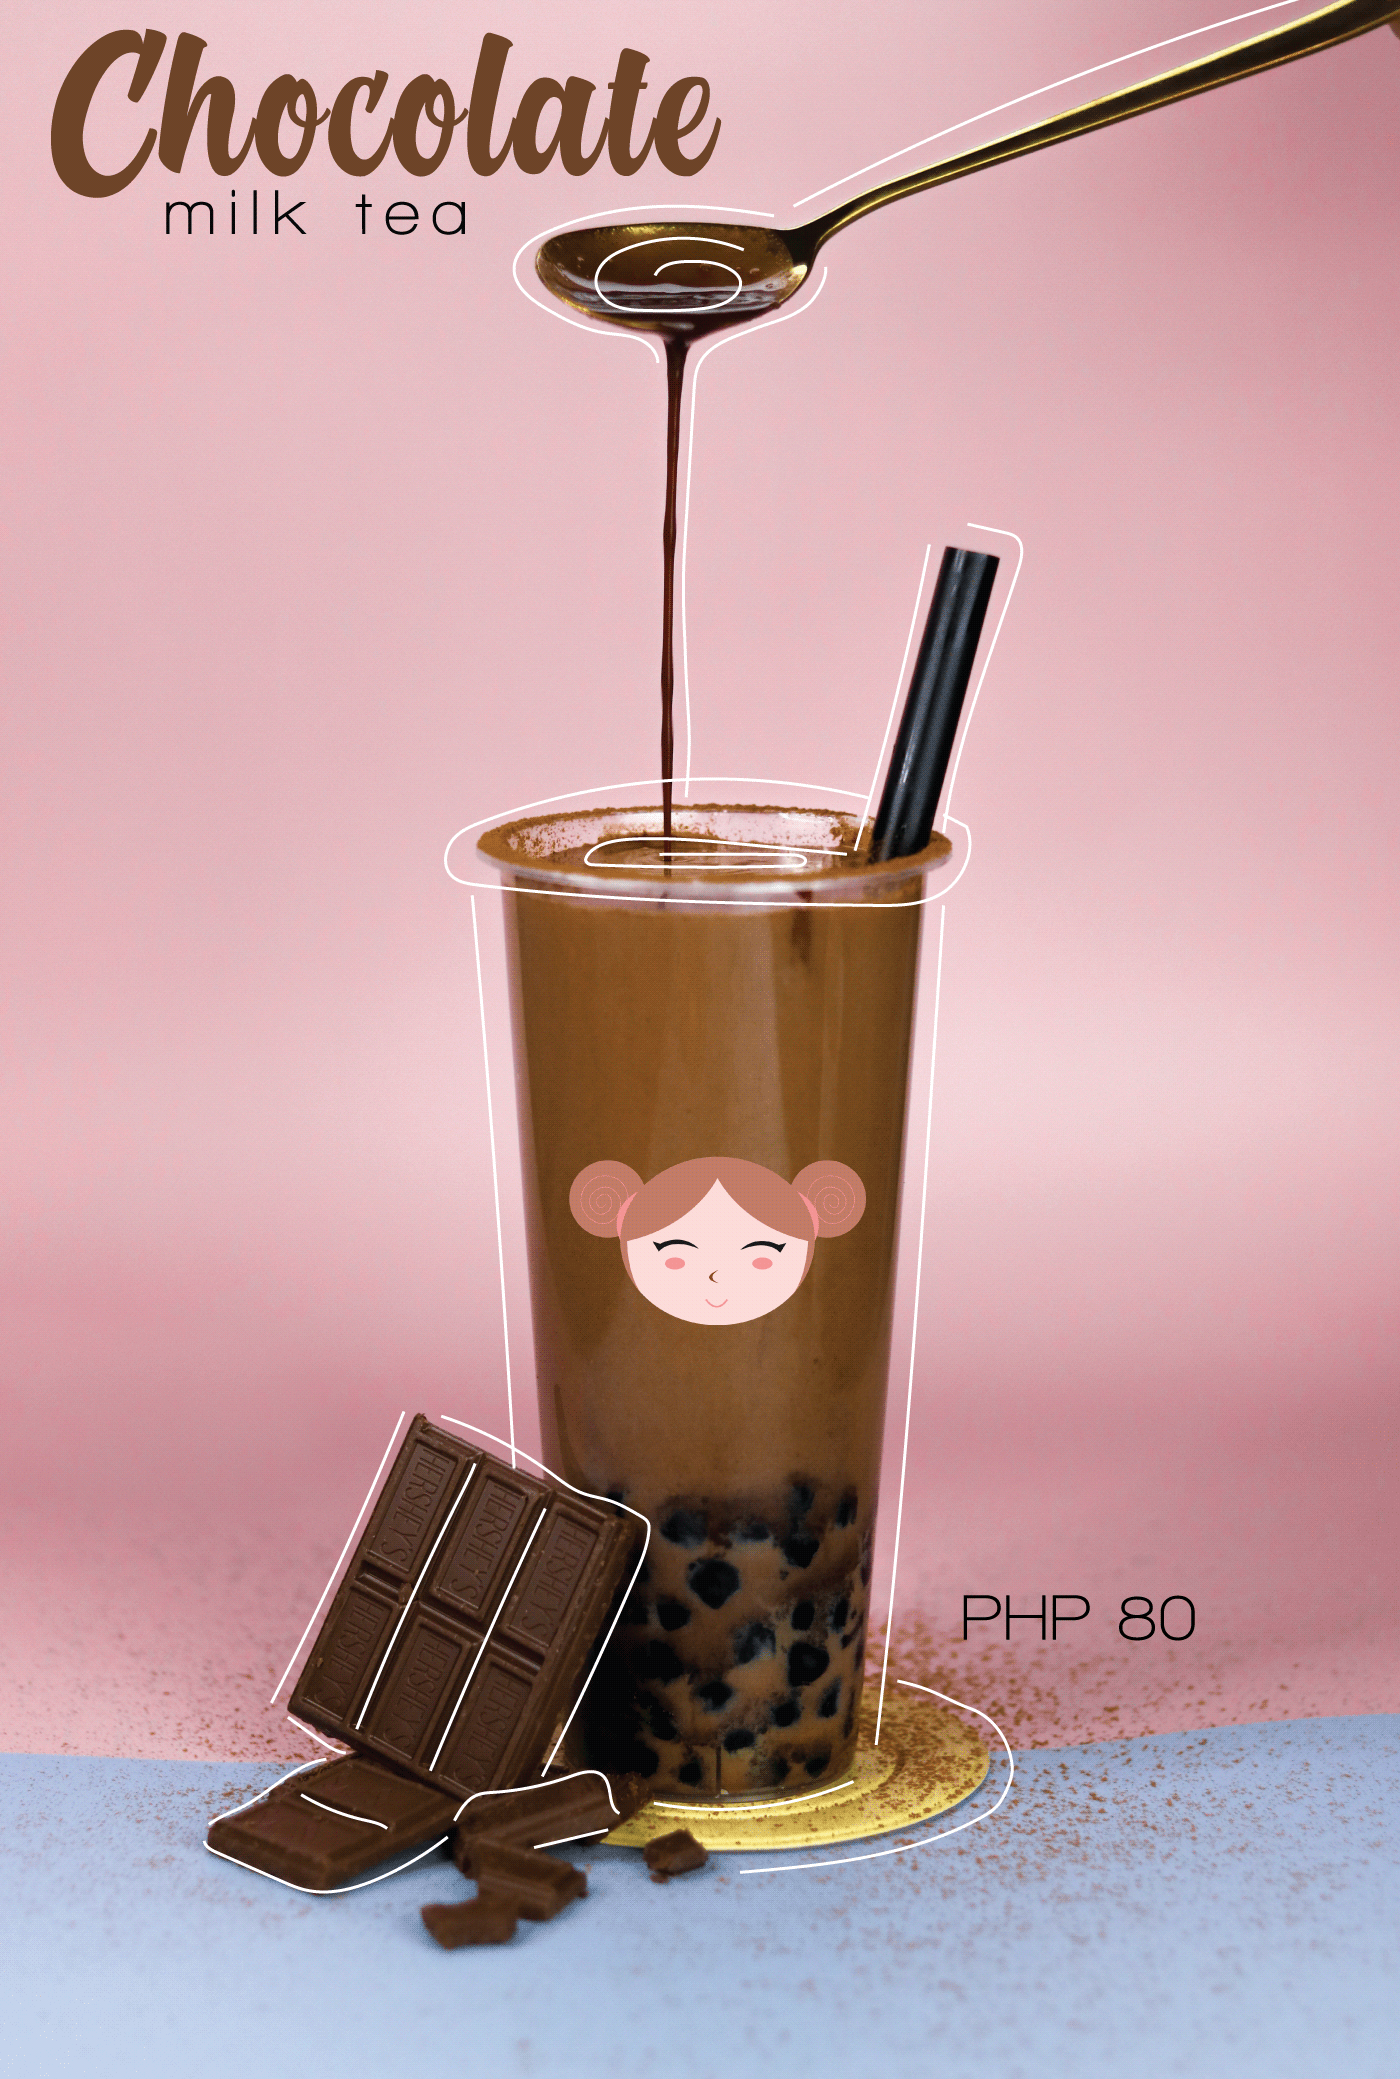 ad design Advertising  Beverage photography food photography graphic design  Marketing collateral milktea Online Business Product Photography